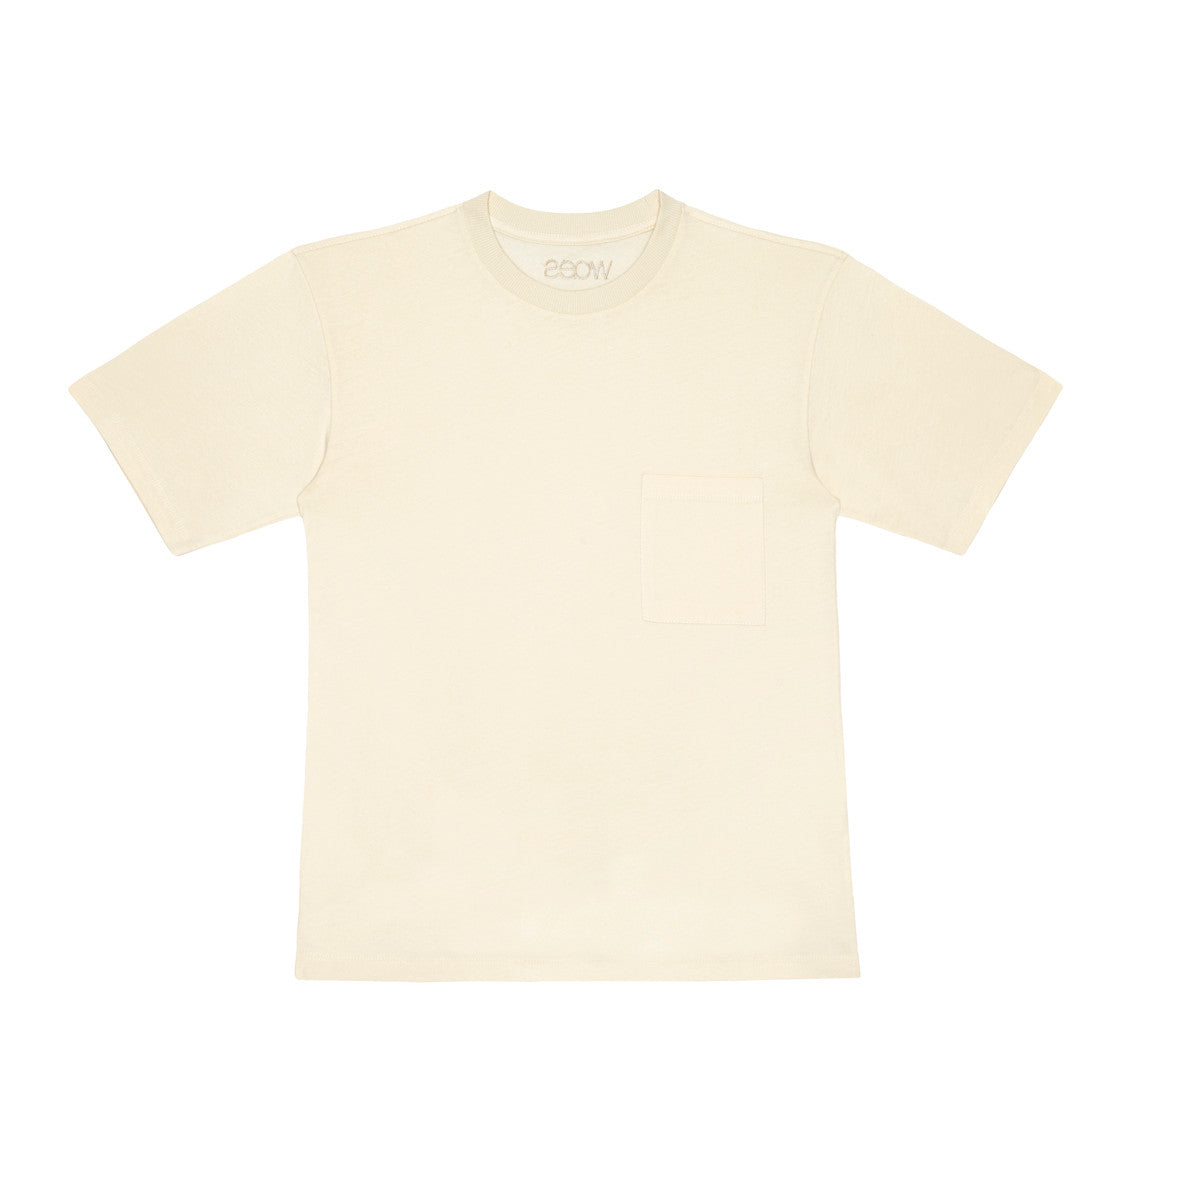 Our Little Hedonist round neck t-shirt in beige is a populair essential. It has a relaxed-fit, has a pocket on the chest and is made from our premium organic cotton. The neckline is round and fitted, with short sleeves. It has bit oversized look.